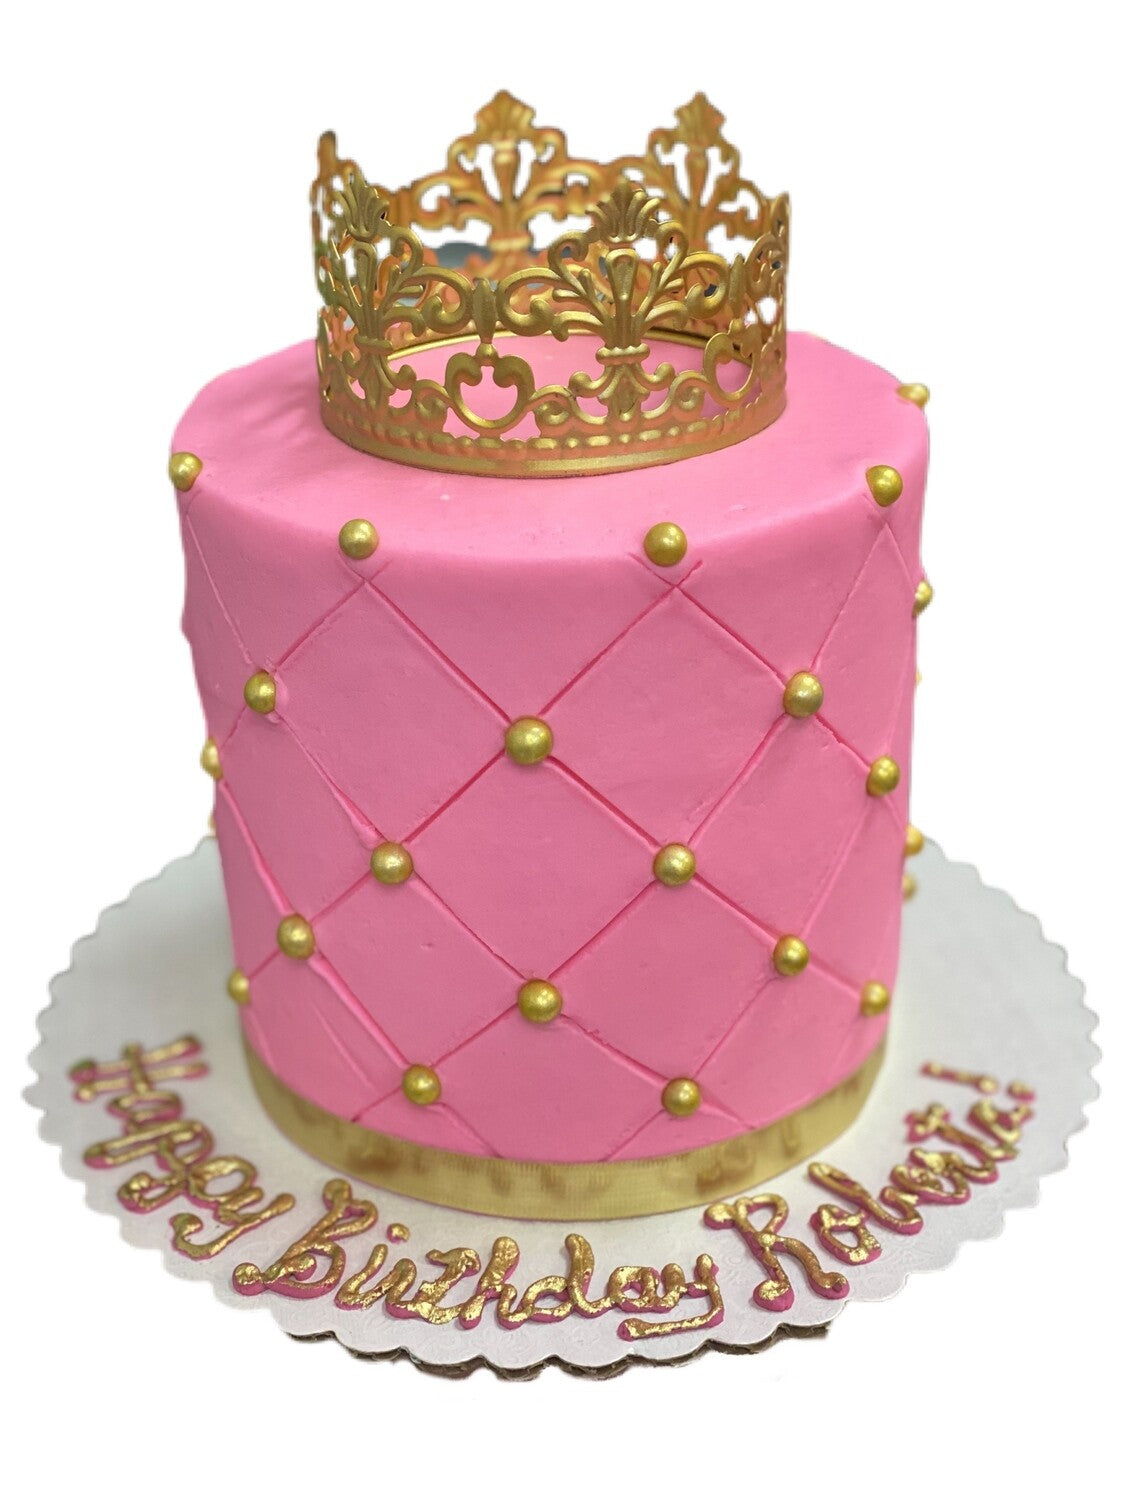 Gold Crown Cake | That's The Cake Bakery